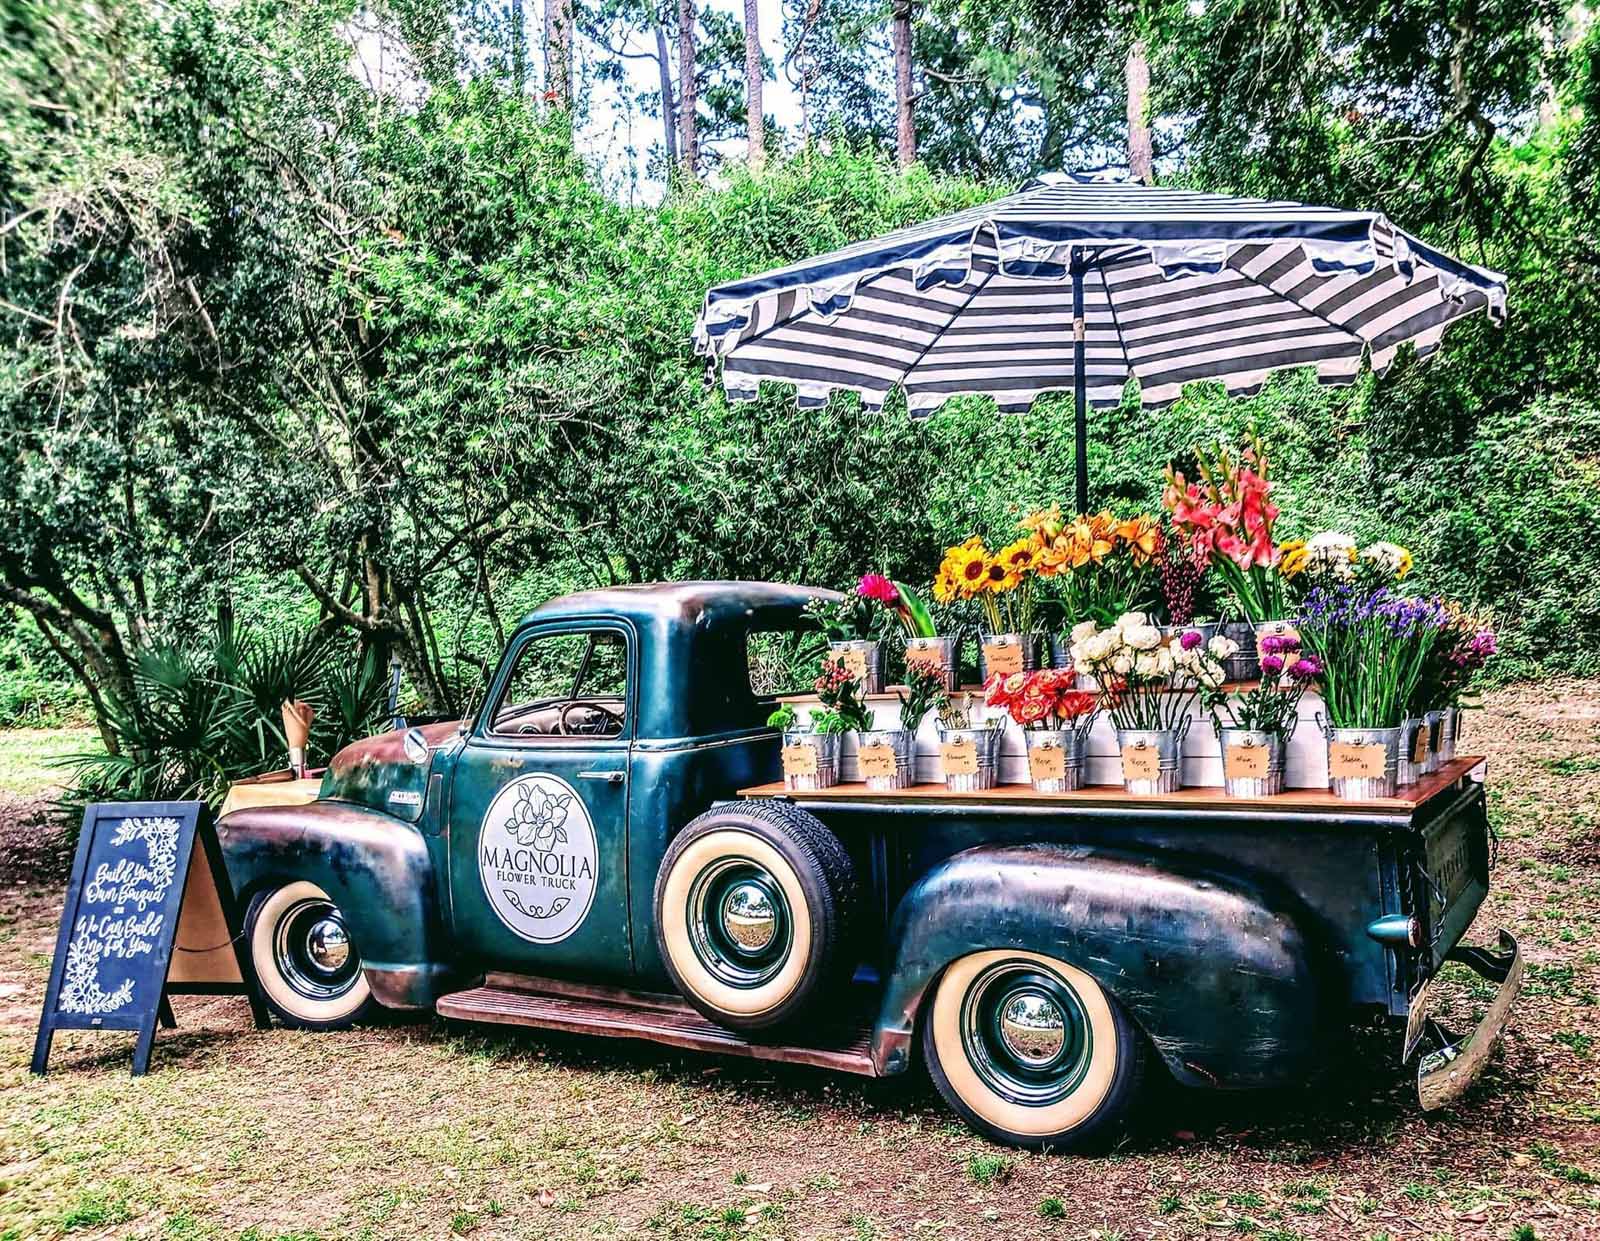 Magnolia Flower Truck Offers Subscription Service